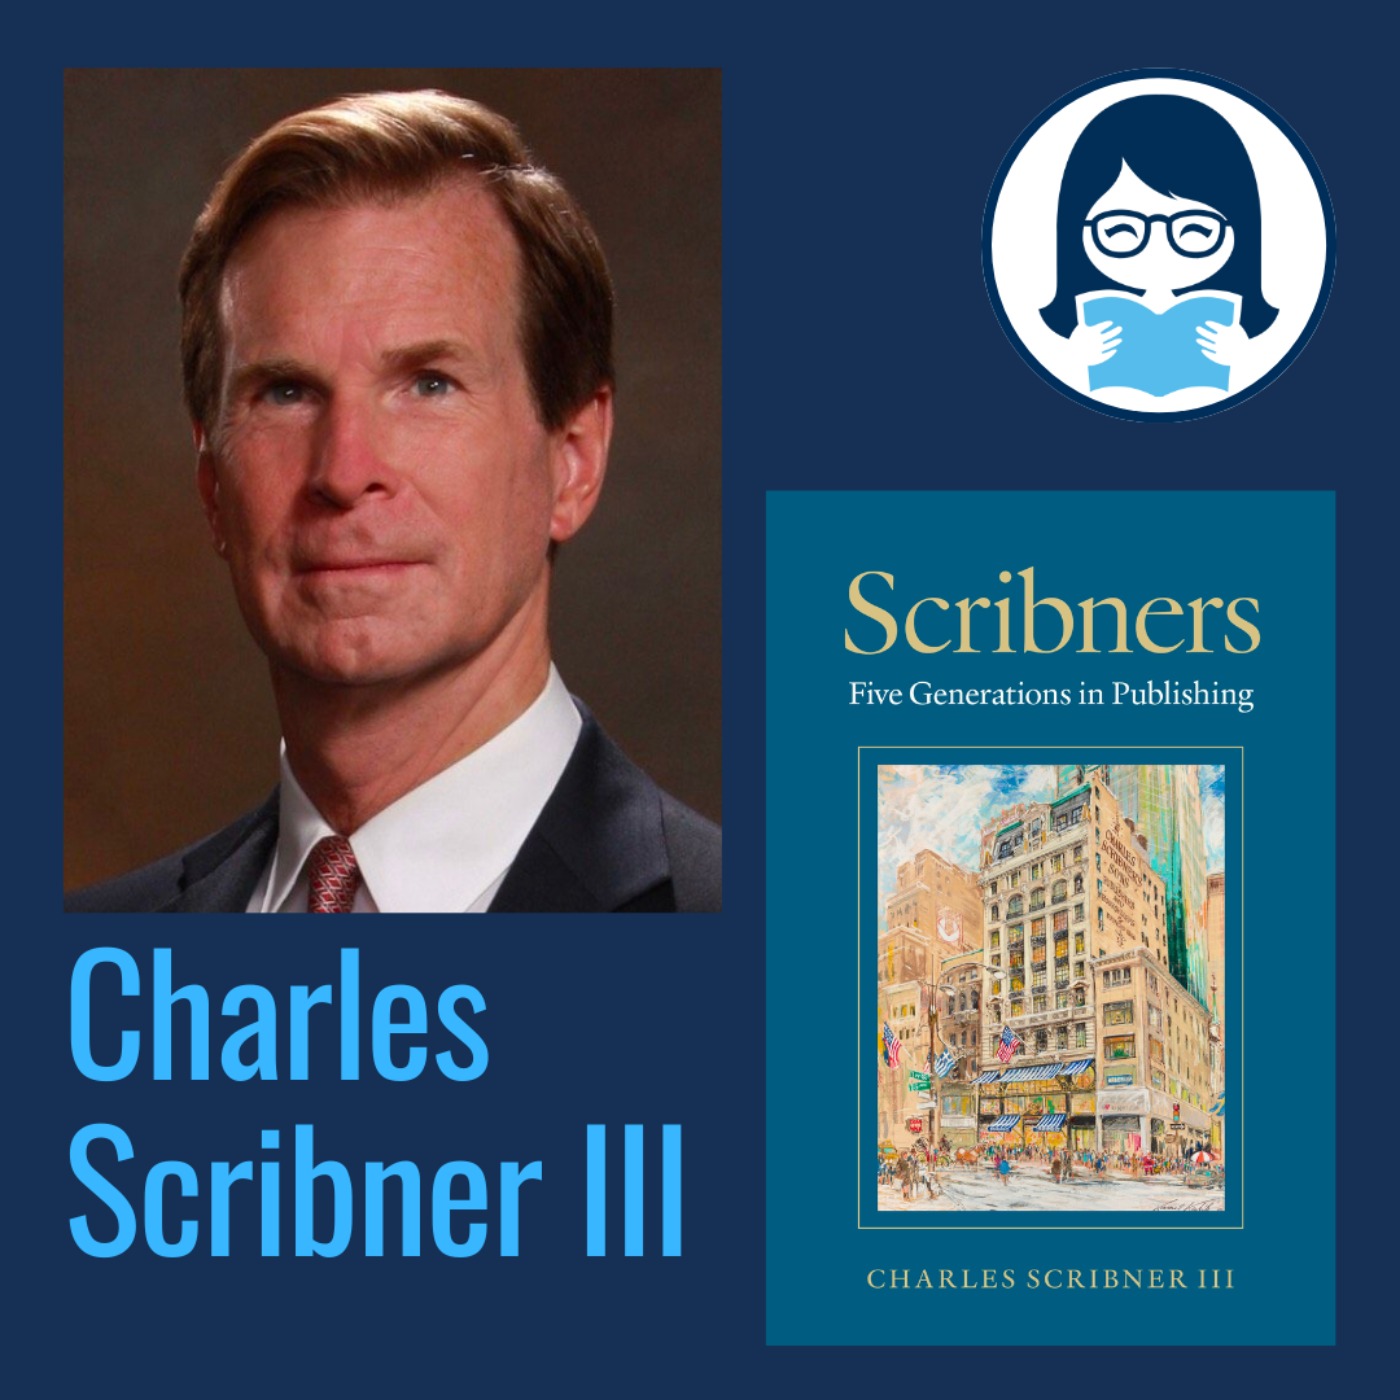 Charles Scribner III, SCRIBNERS: Five Generations in Publishing